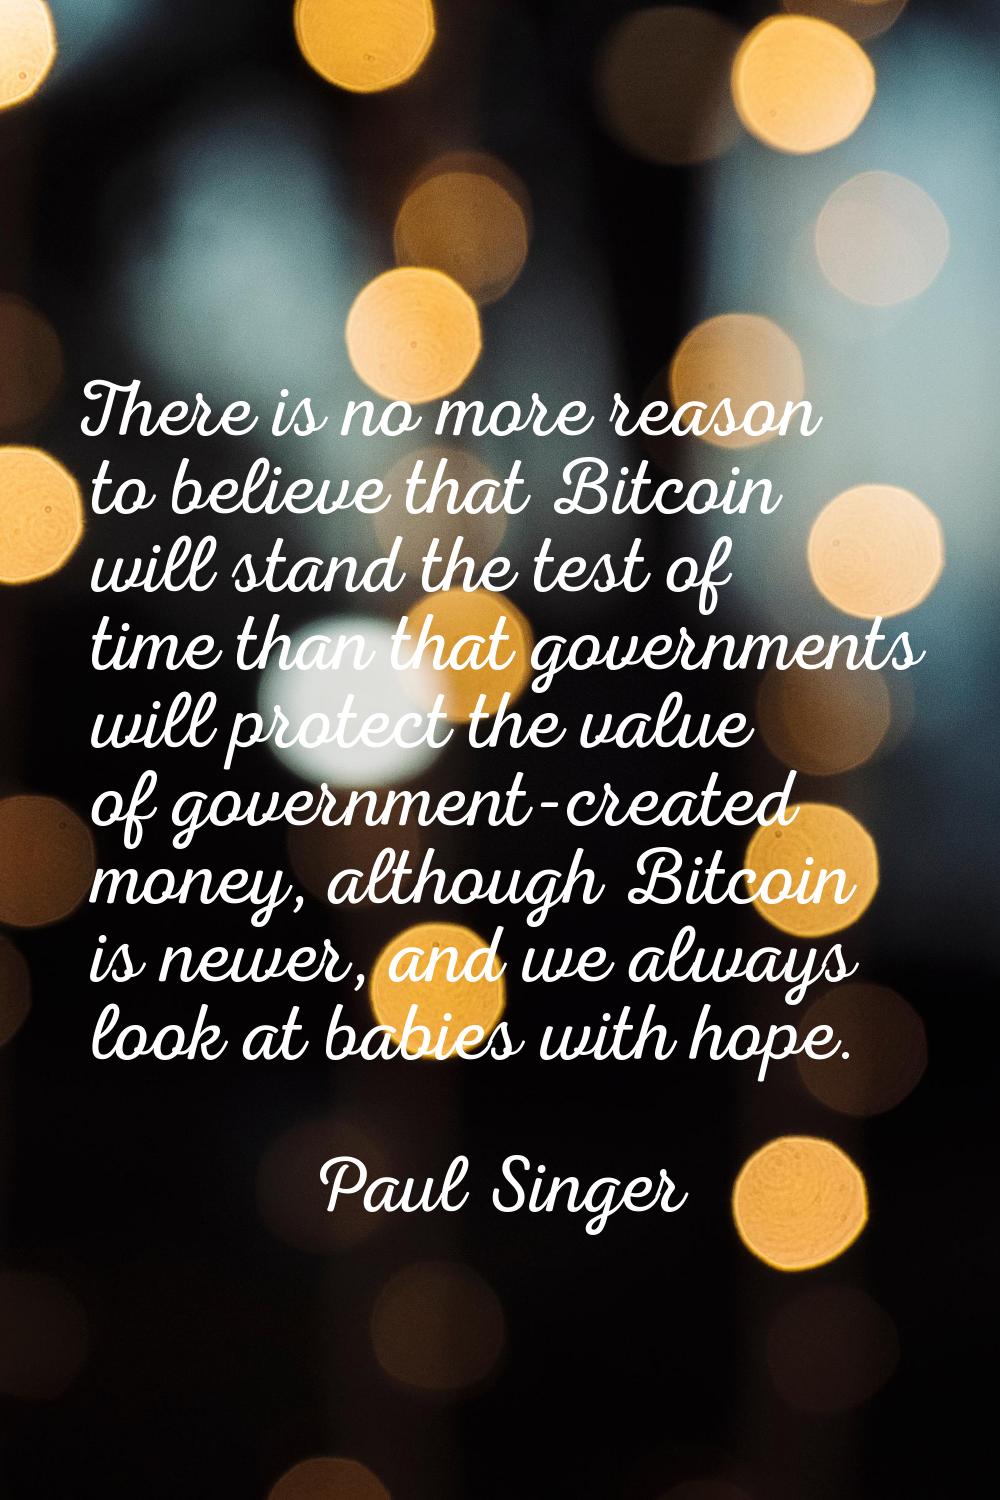 There is no more reason to believe that Bitcoin will stand the test of time than that governments w